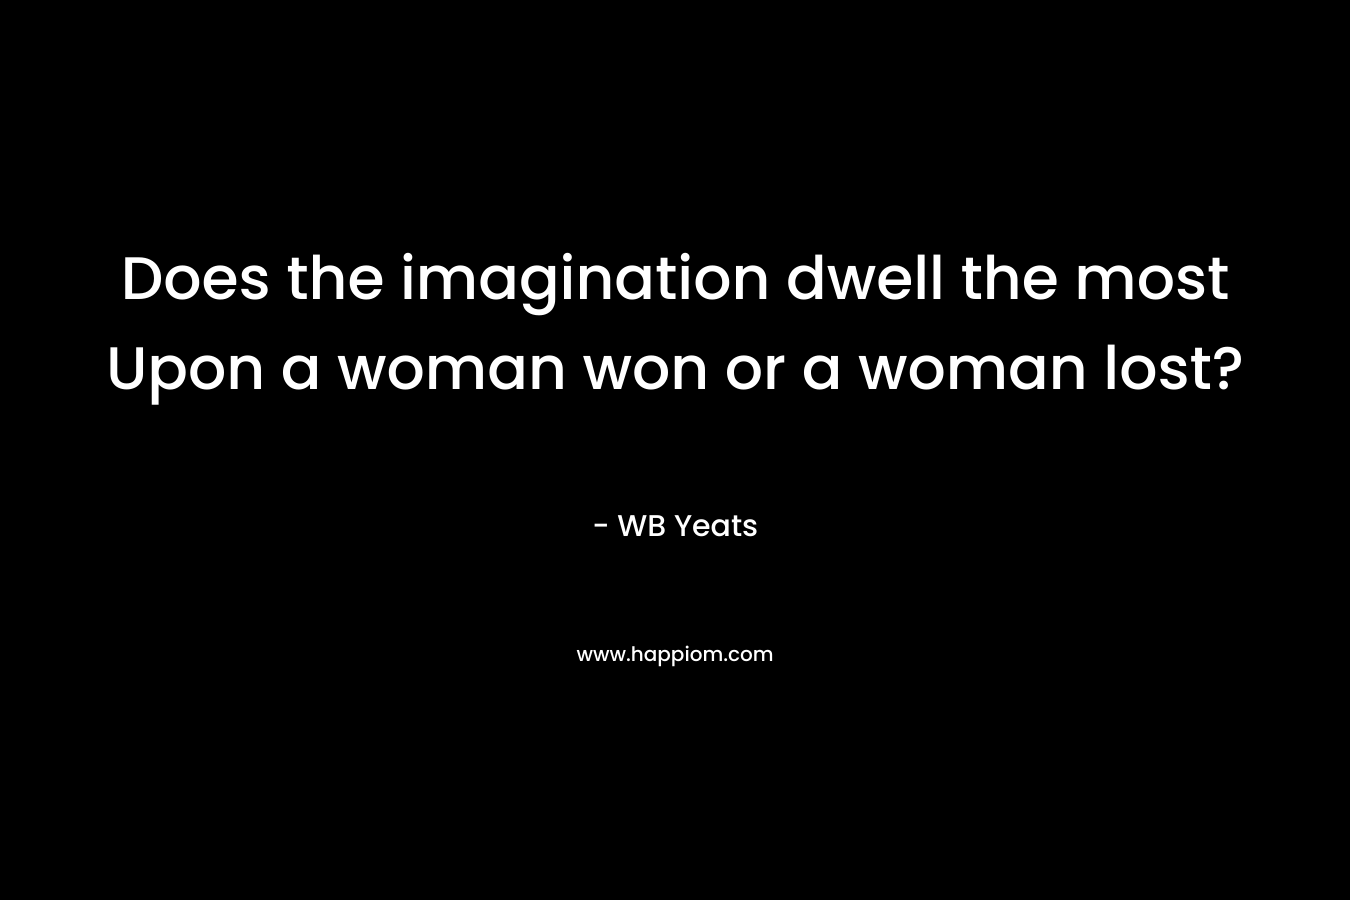 Does the imagination dwell the most Upon a woman won or a woman lost?